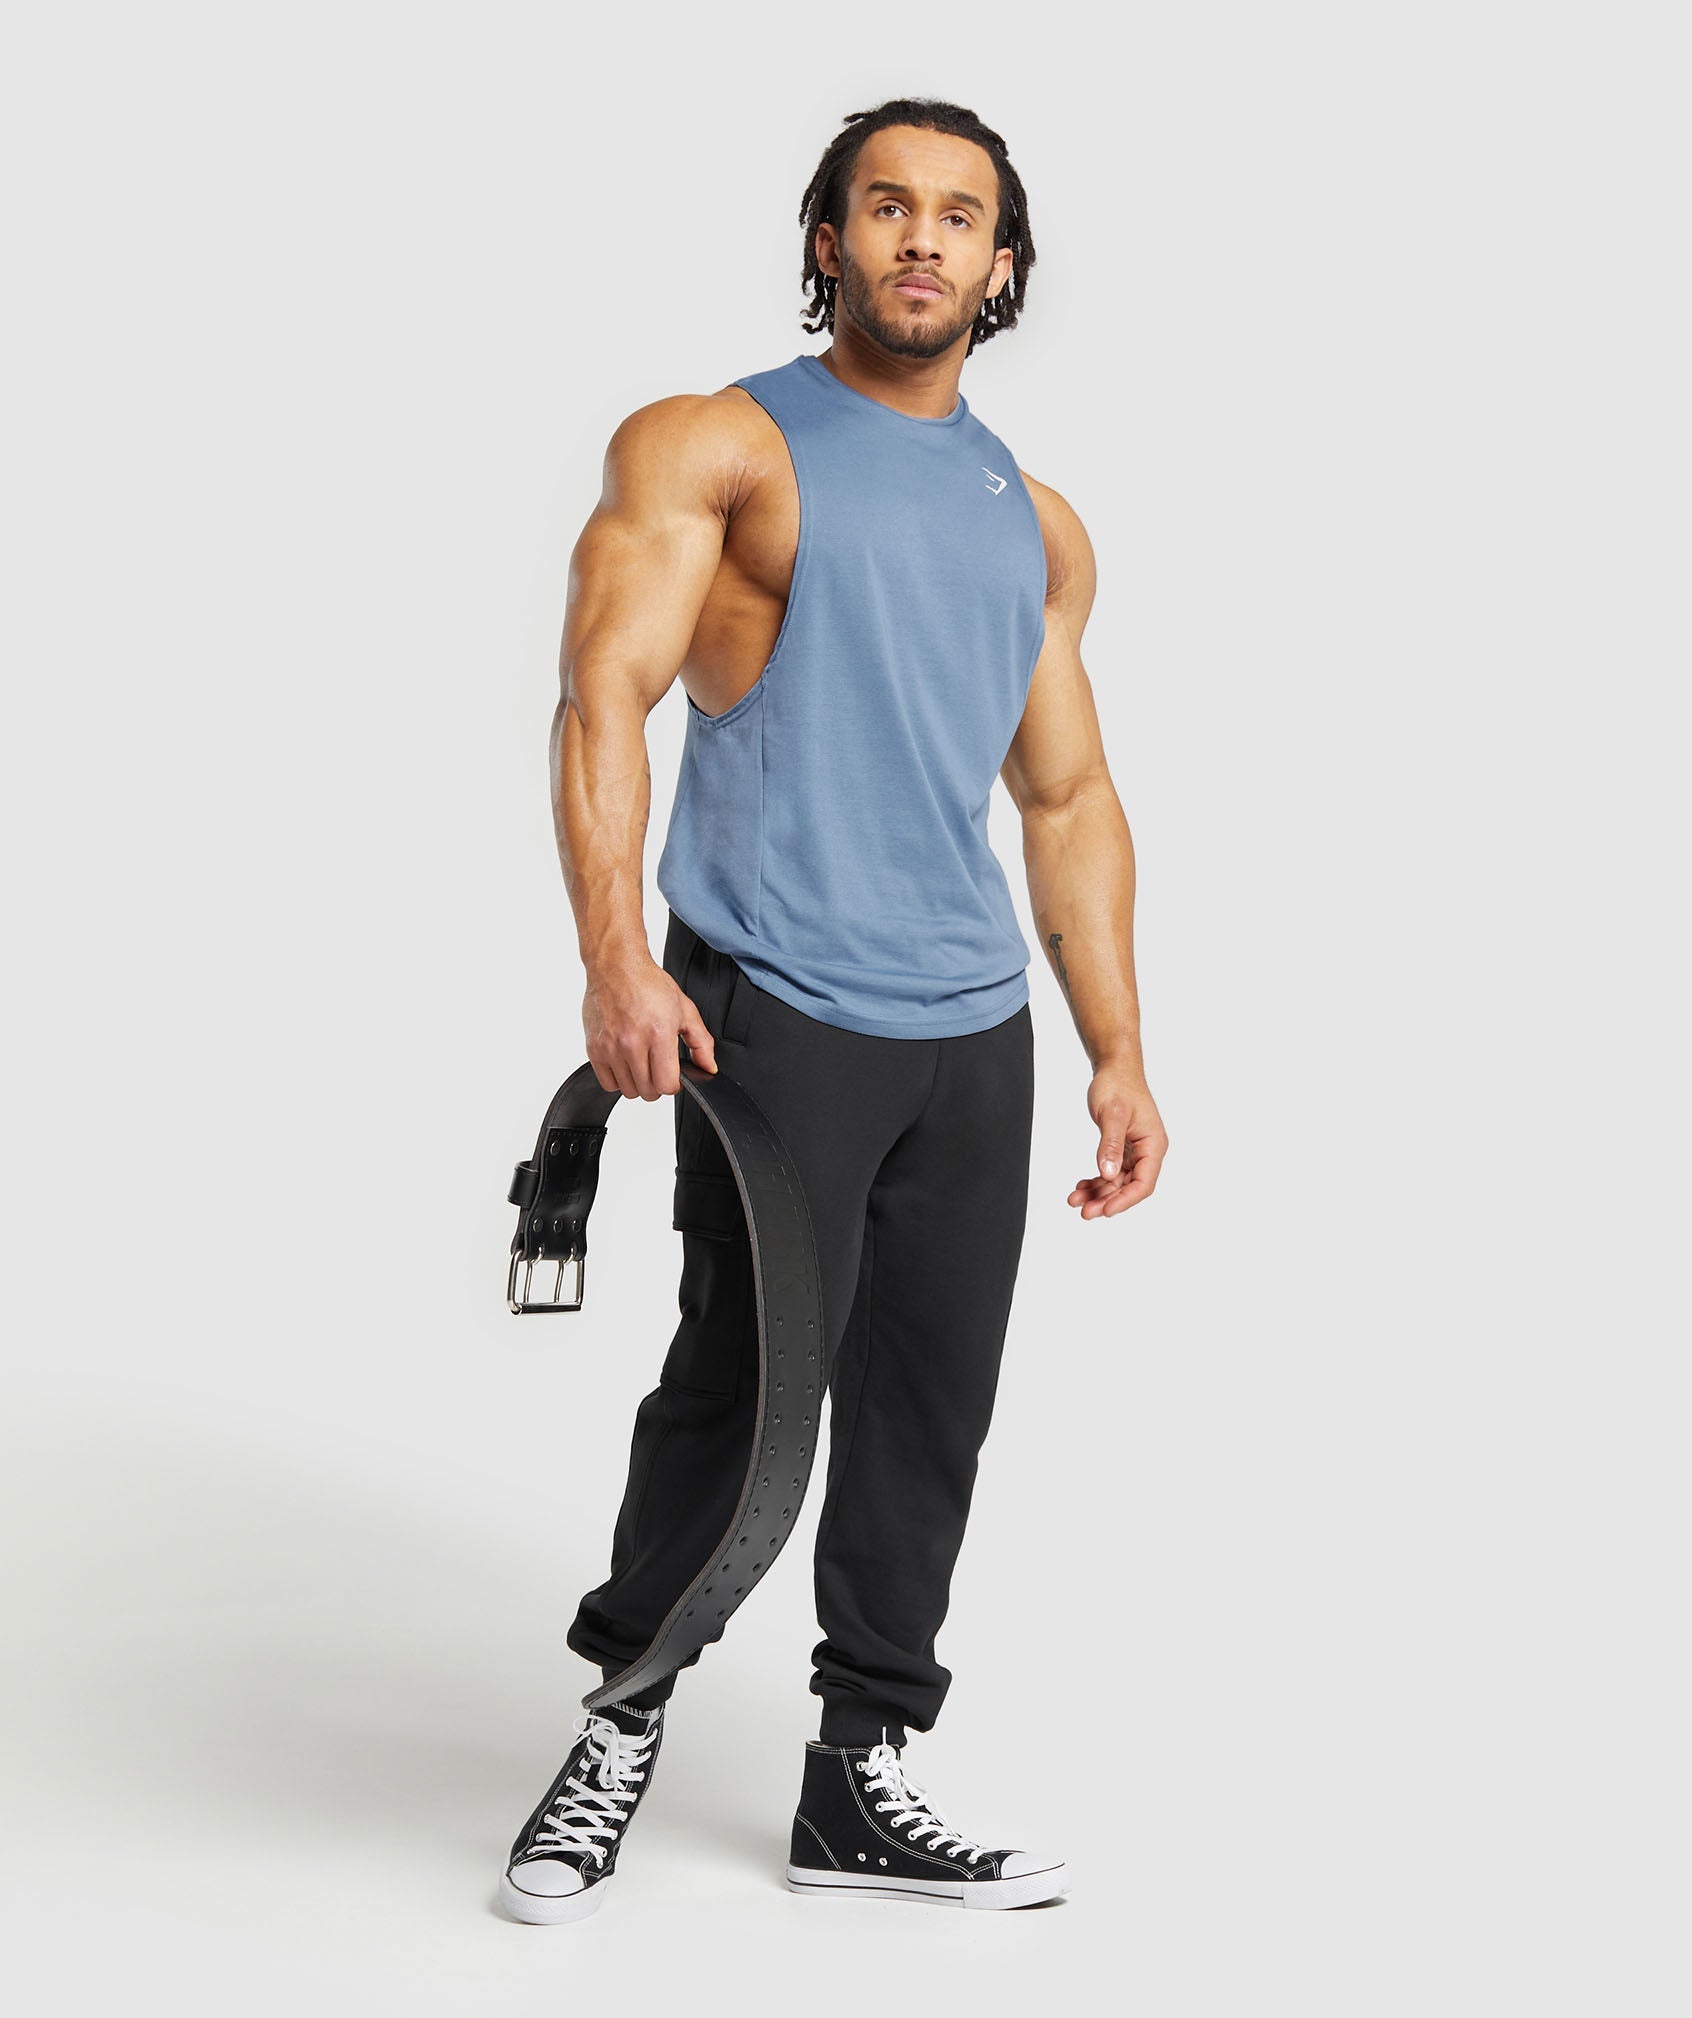 React Drop Arm Tank in Faded Blue - view 4